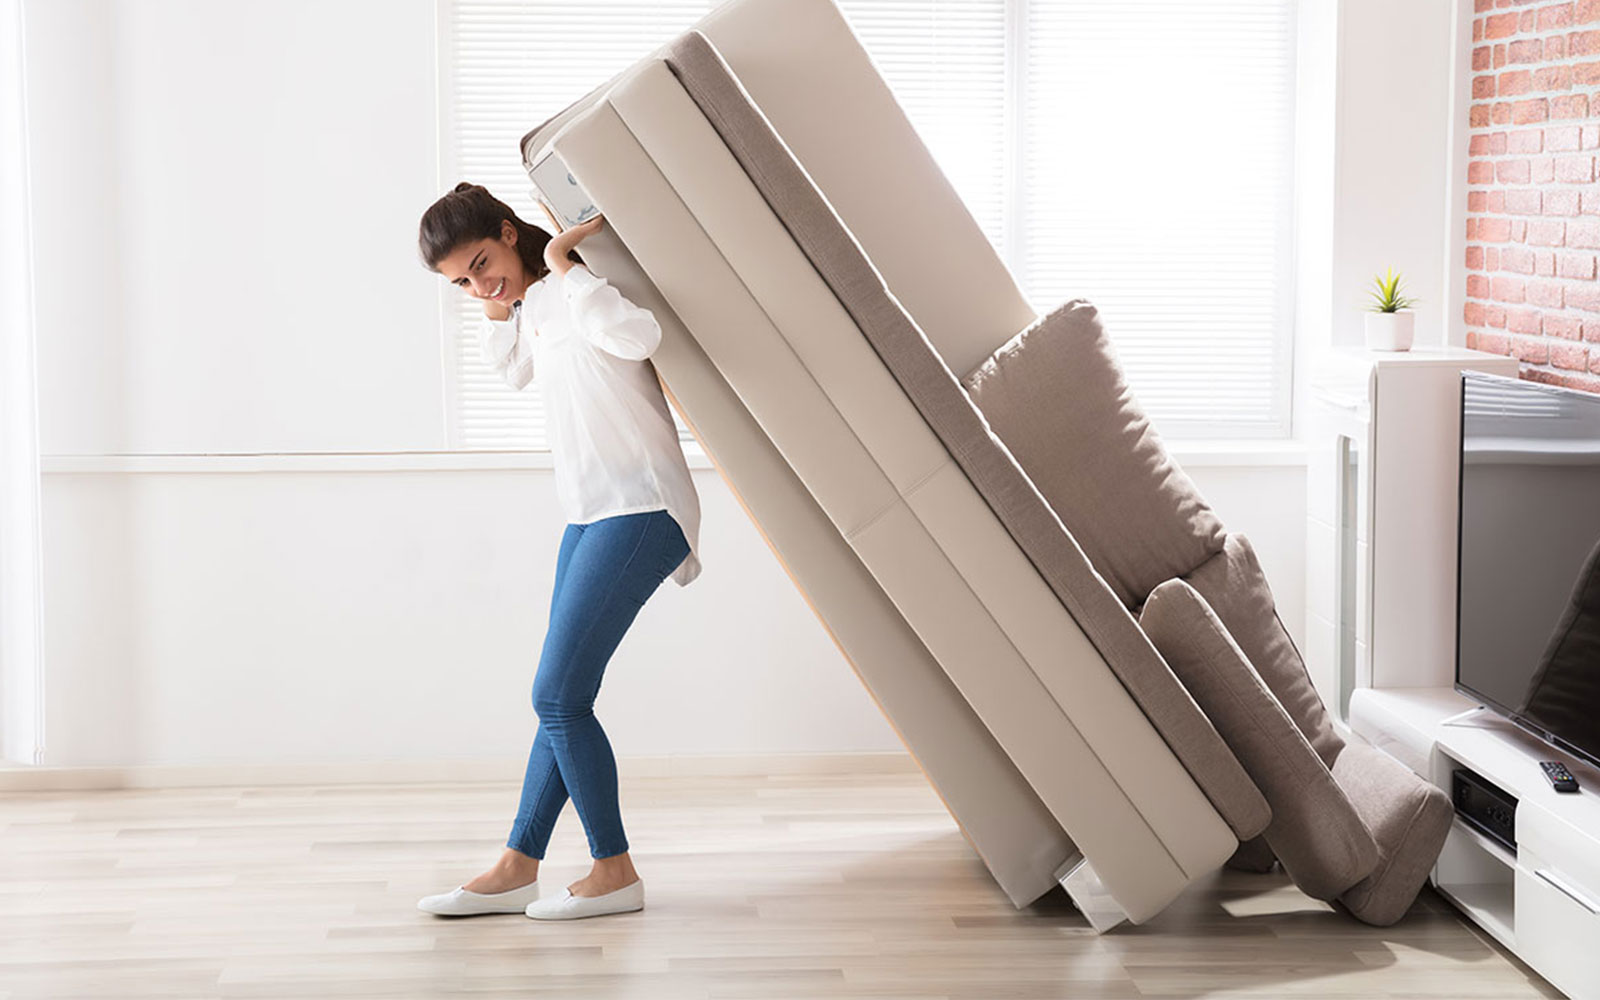 Lady moving sofa | Vallow Floor Coverings, Inc.